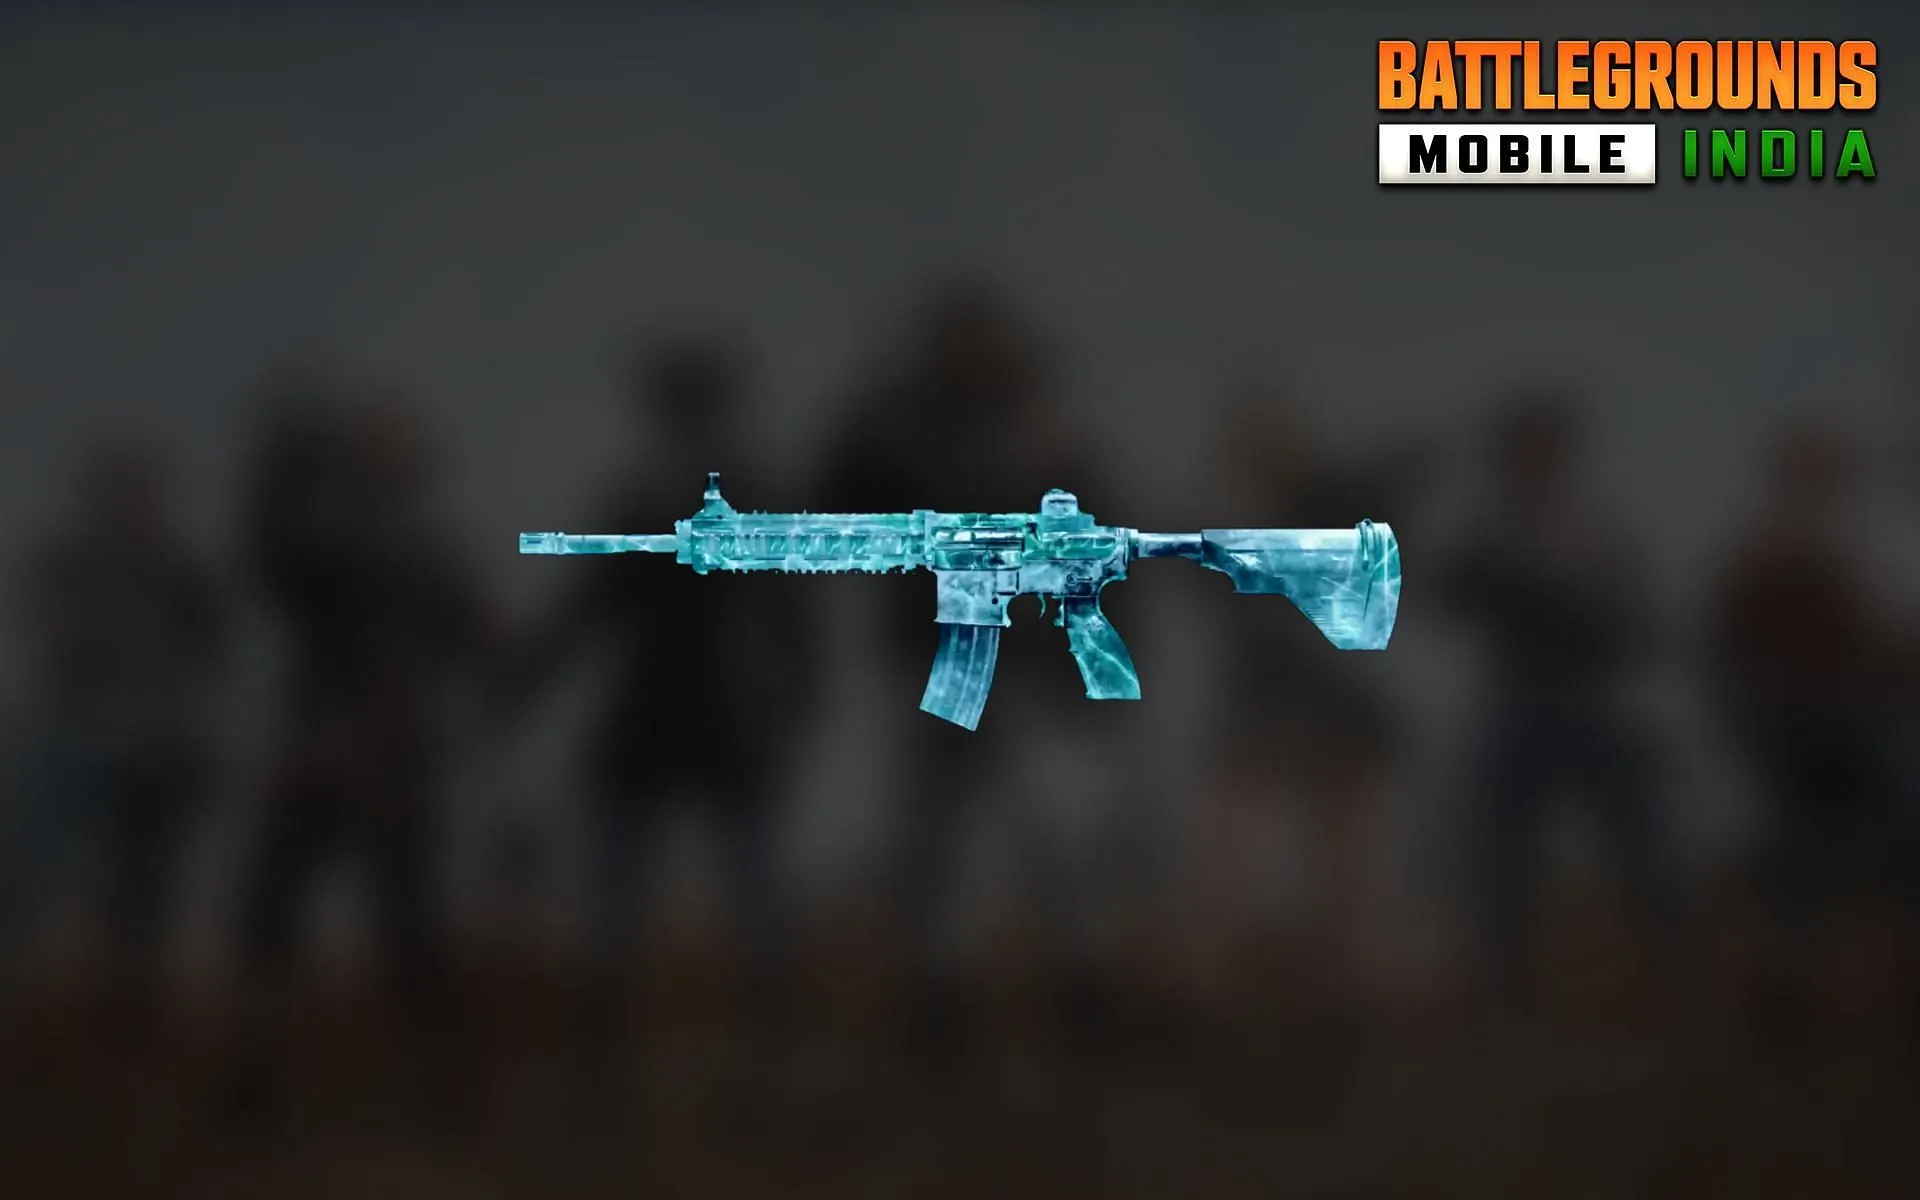 The M416 Glacier skin is one of the most sought-after weapon skins in BGMI. It is a legendary skin that is known for its unique appearance and its powerful stats. There are a few ways to get the M416 Glacier skin, but the most common way is to open Classic crates.